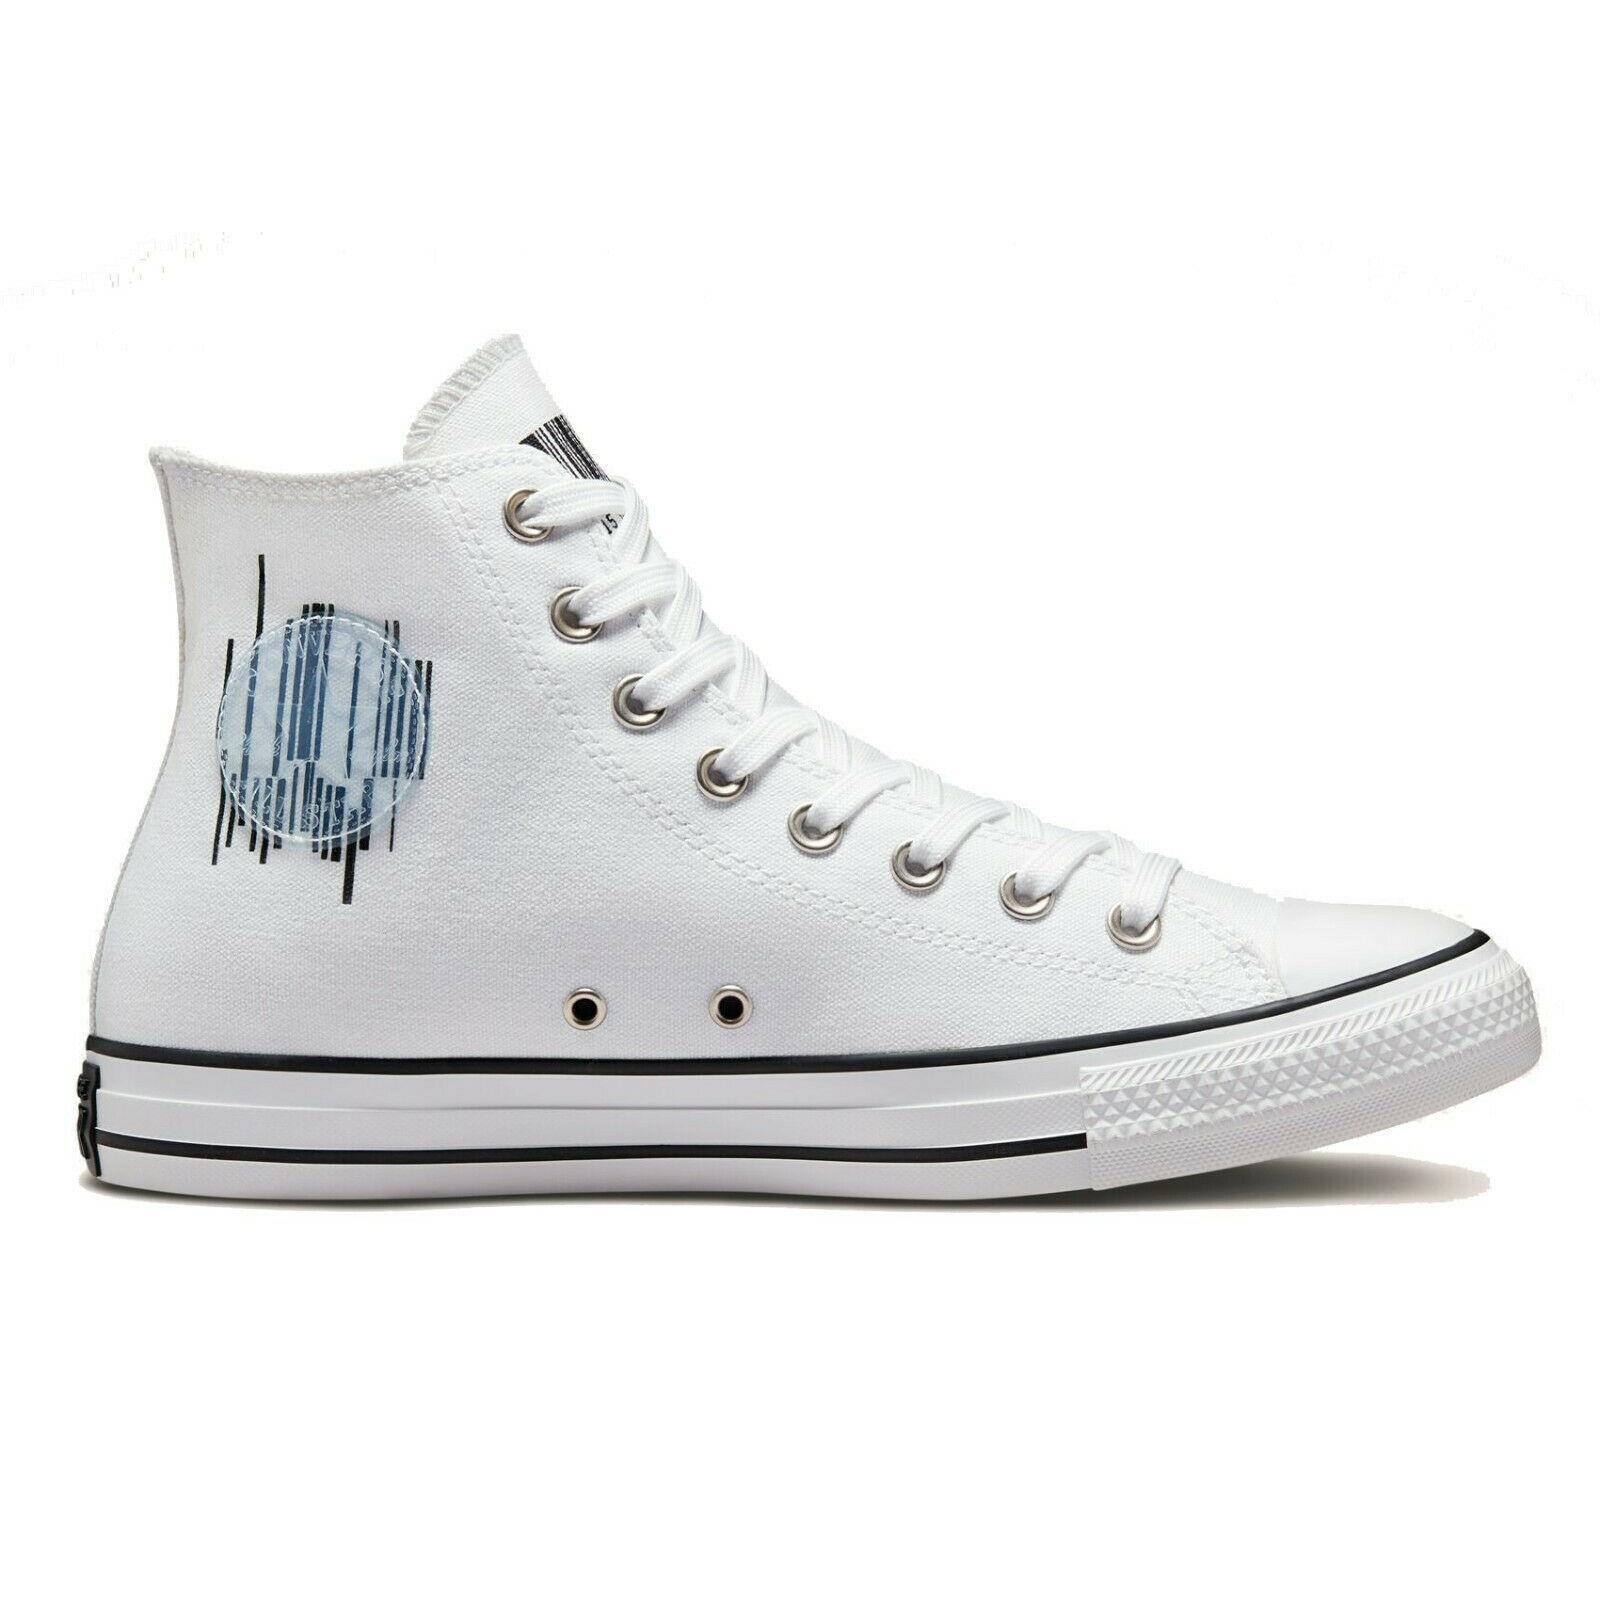 Converse High Top Ortholite Cushioning Rubber Outsole Lightweigh Men`s Shoes White/Black/White